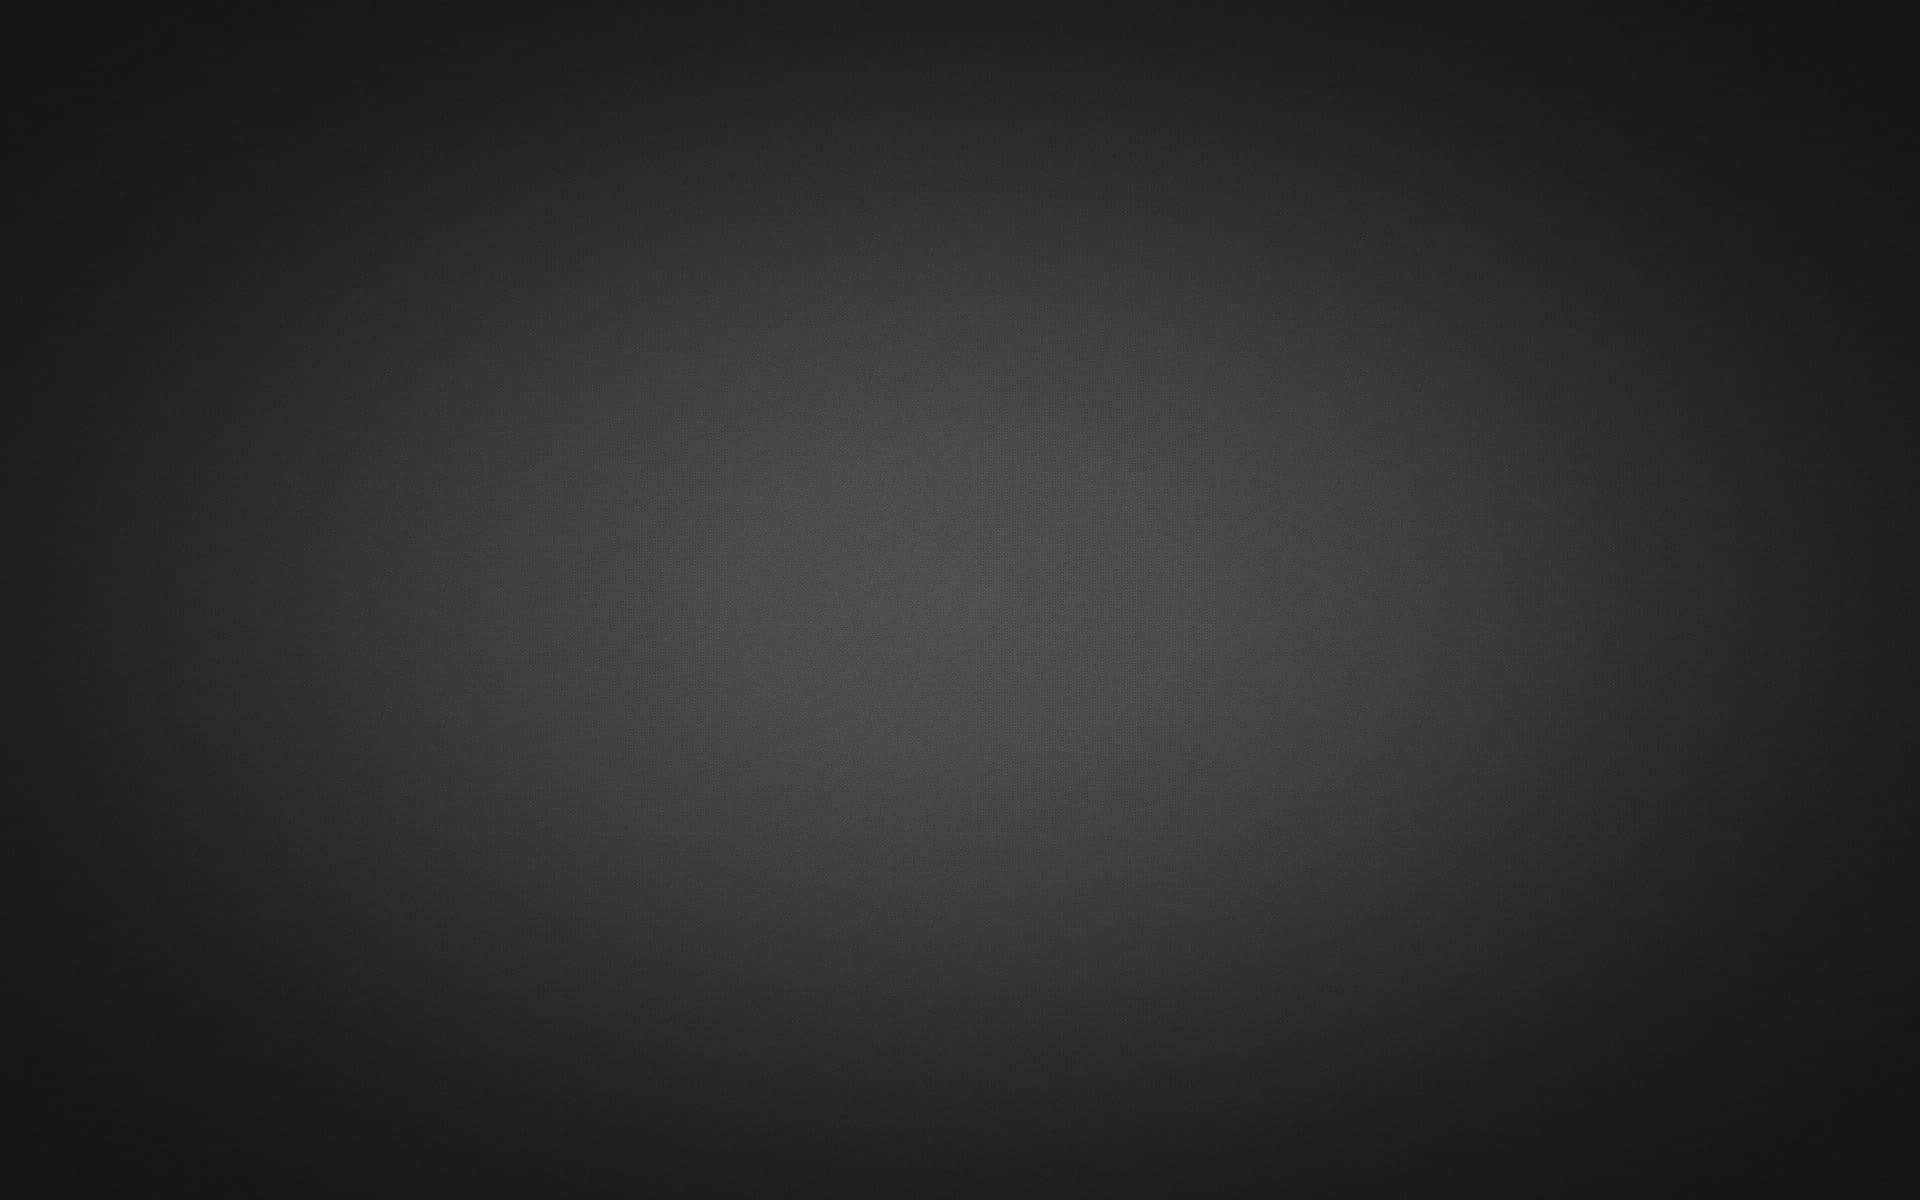 100+] Black And Grey Backgrounds